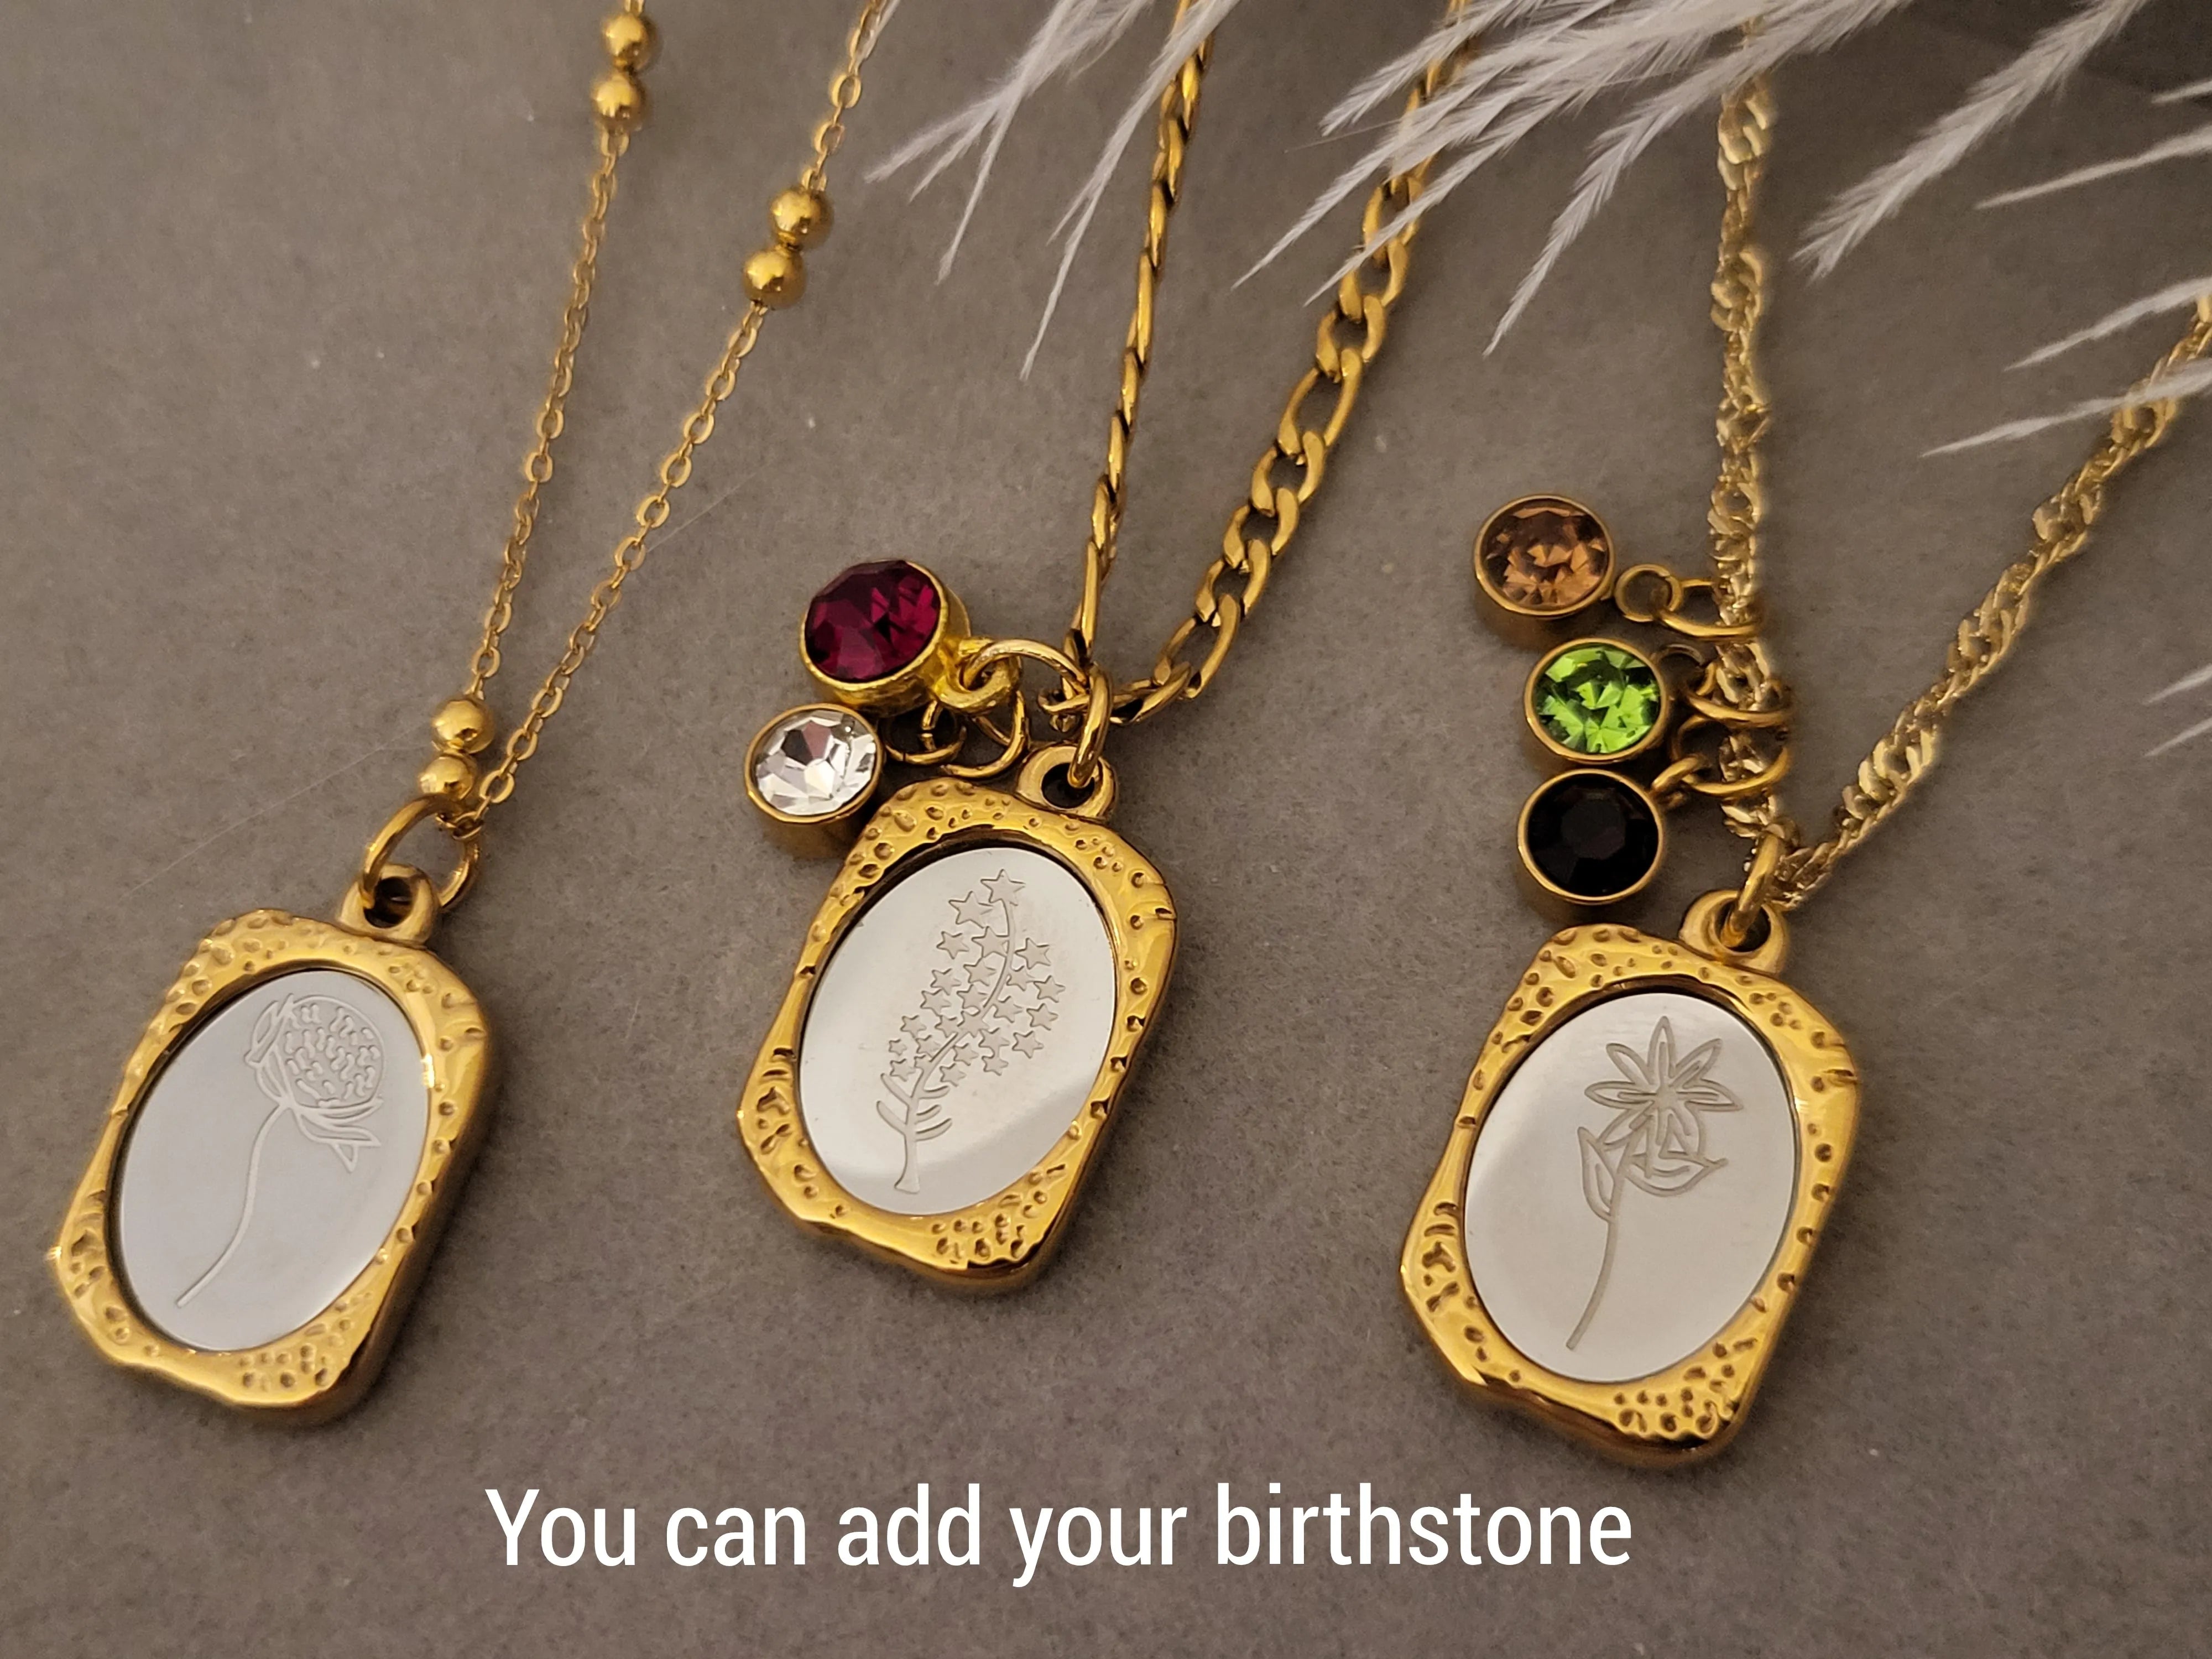 Gold Mirror Birth Month Flower Necklace product images.